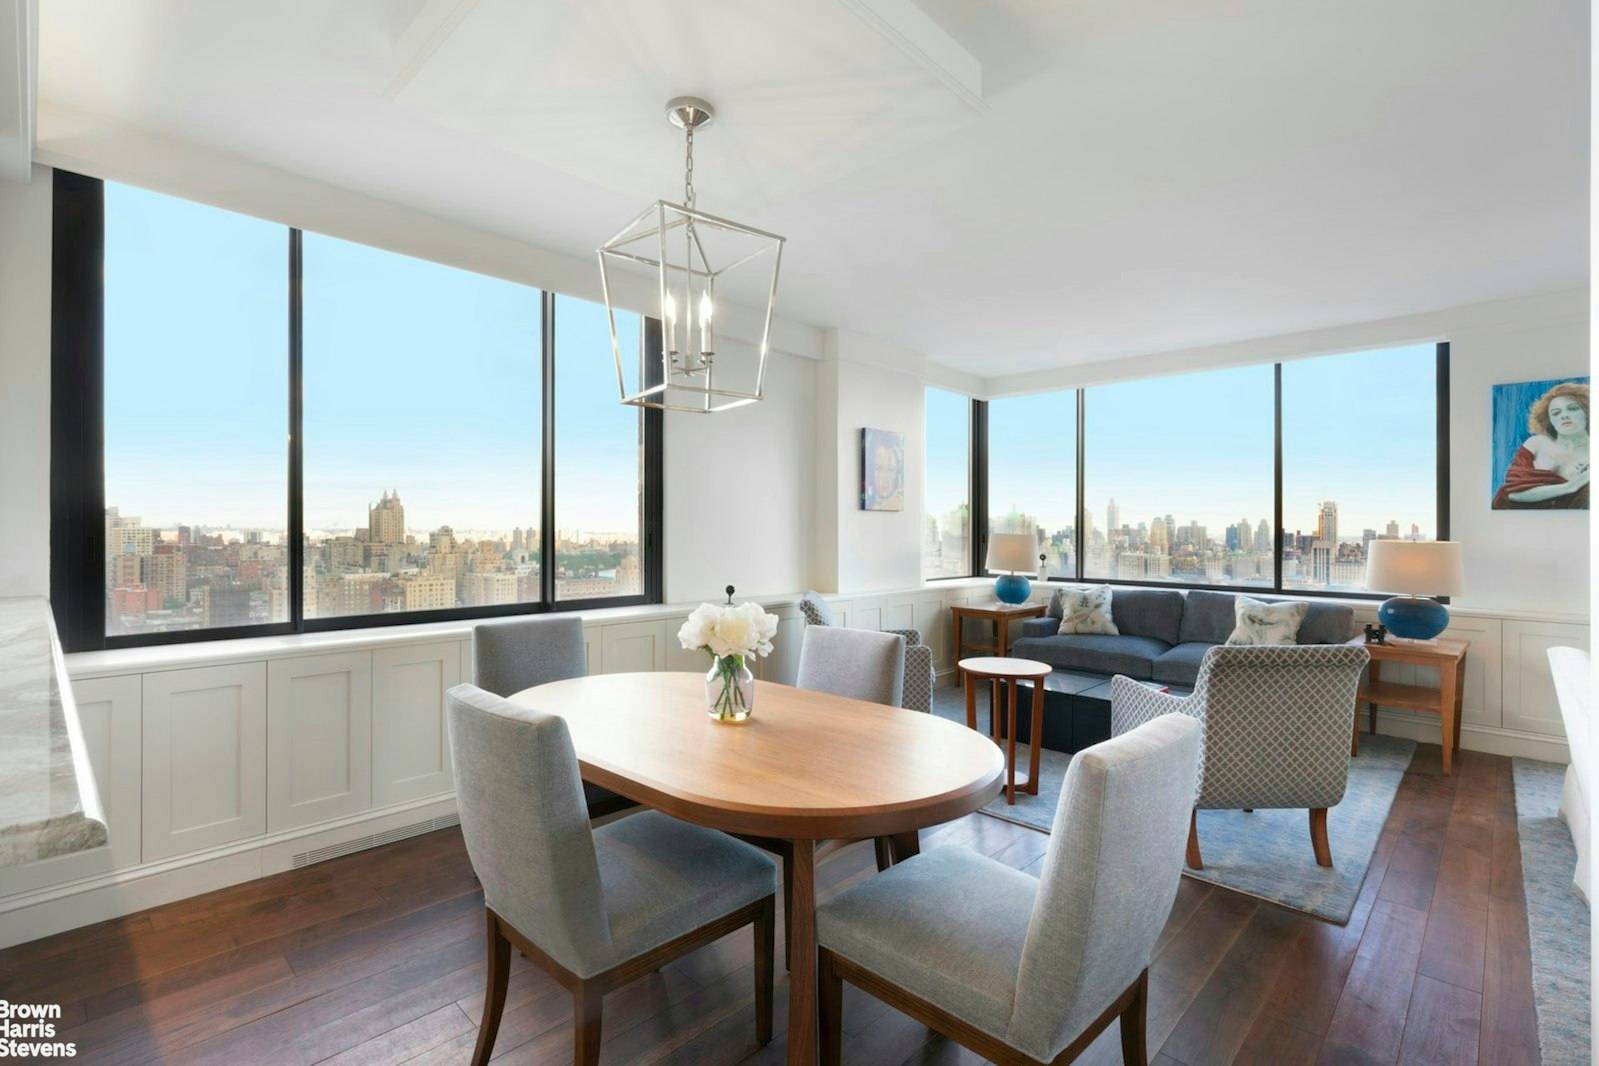 High in the tower, a rare opportunity to own this fabulous corner, 2 3 bedroom home, with spectacular panoramic Central Park, City and Hudson River views.